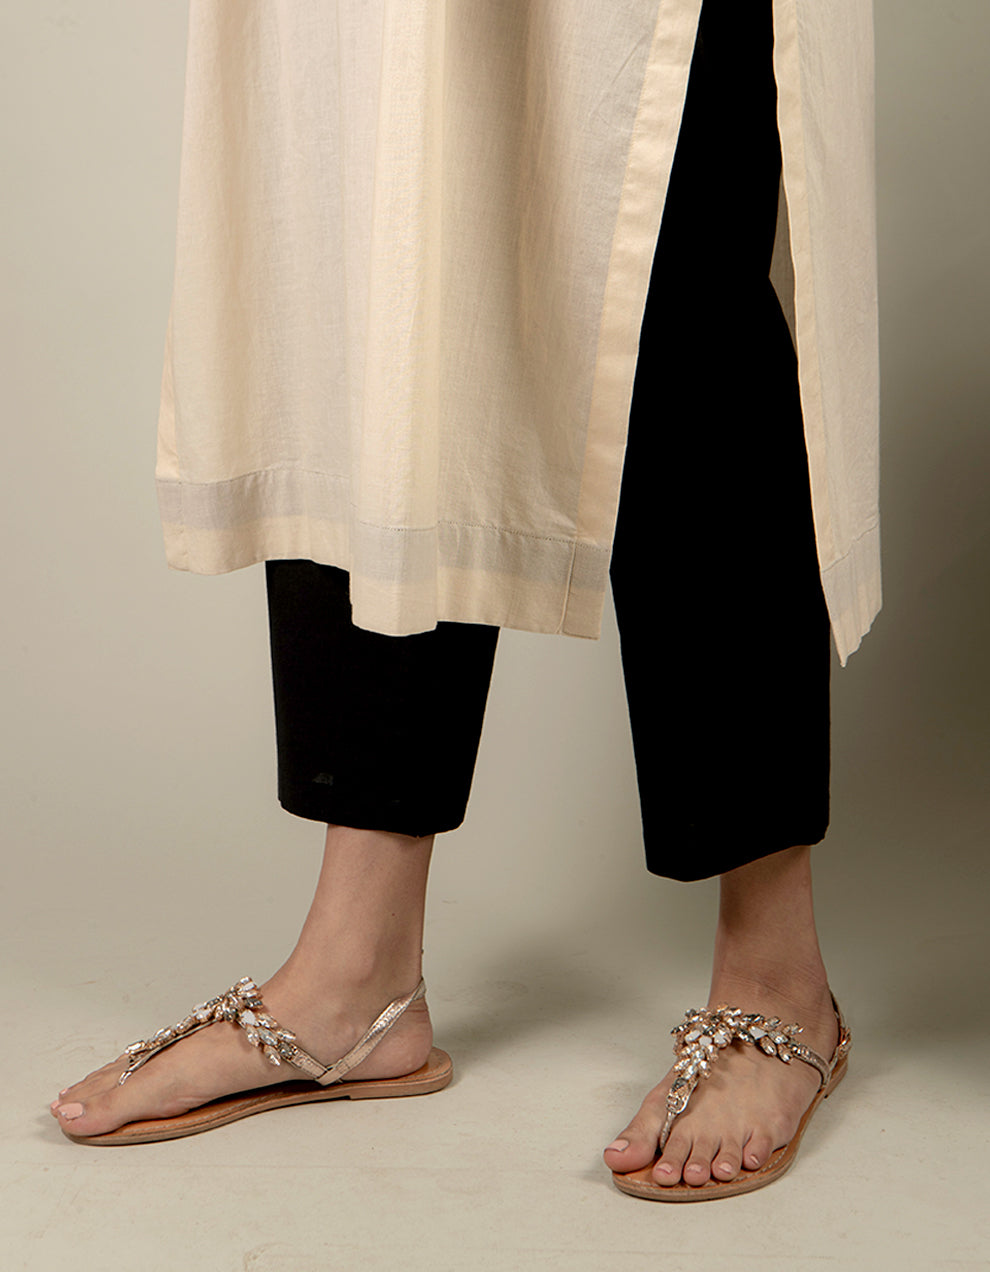 Black and Ivory dip-dyed cotton kurta with straight-cut pants